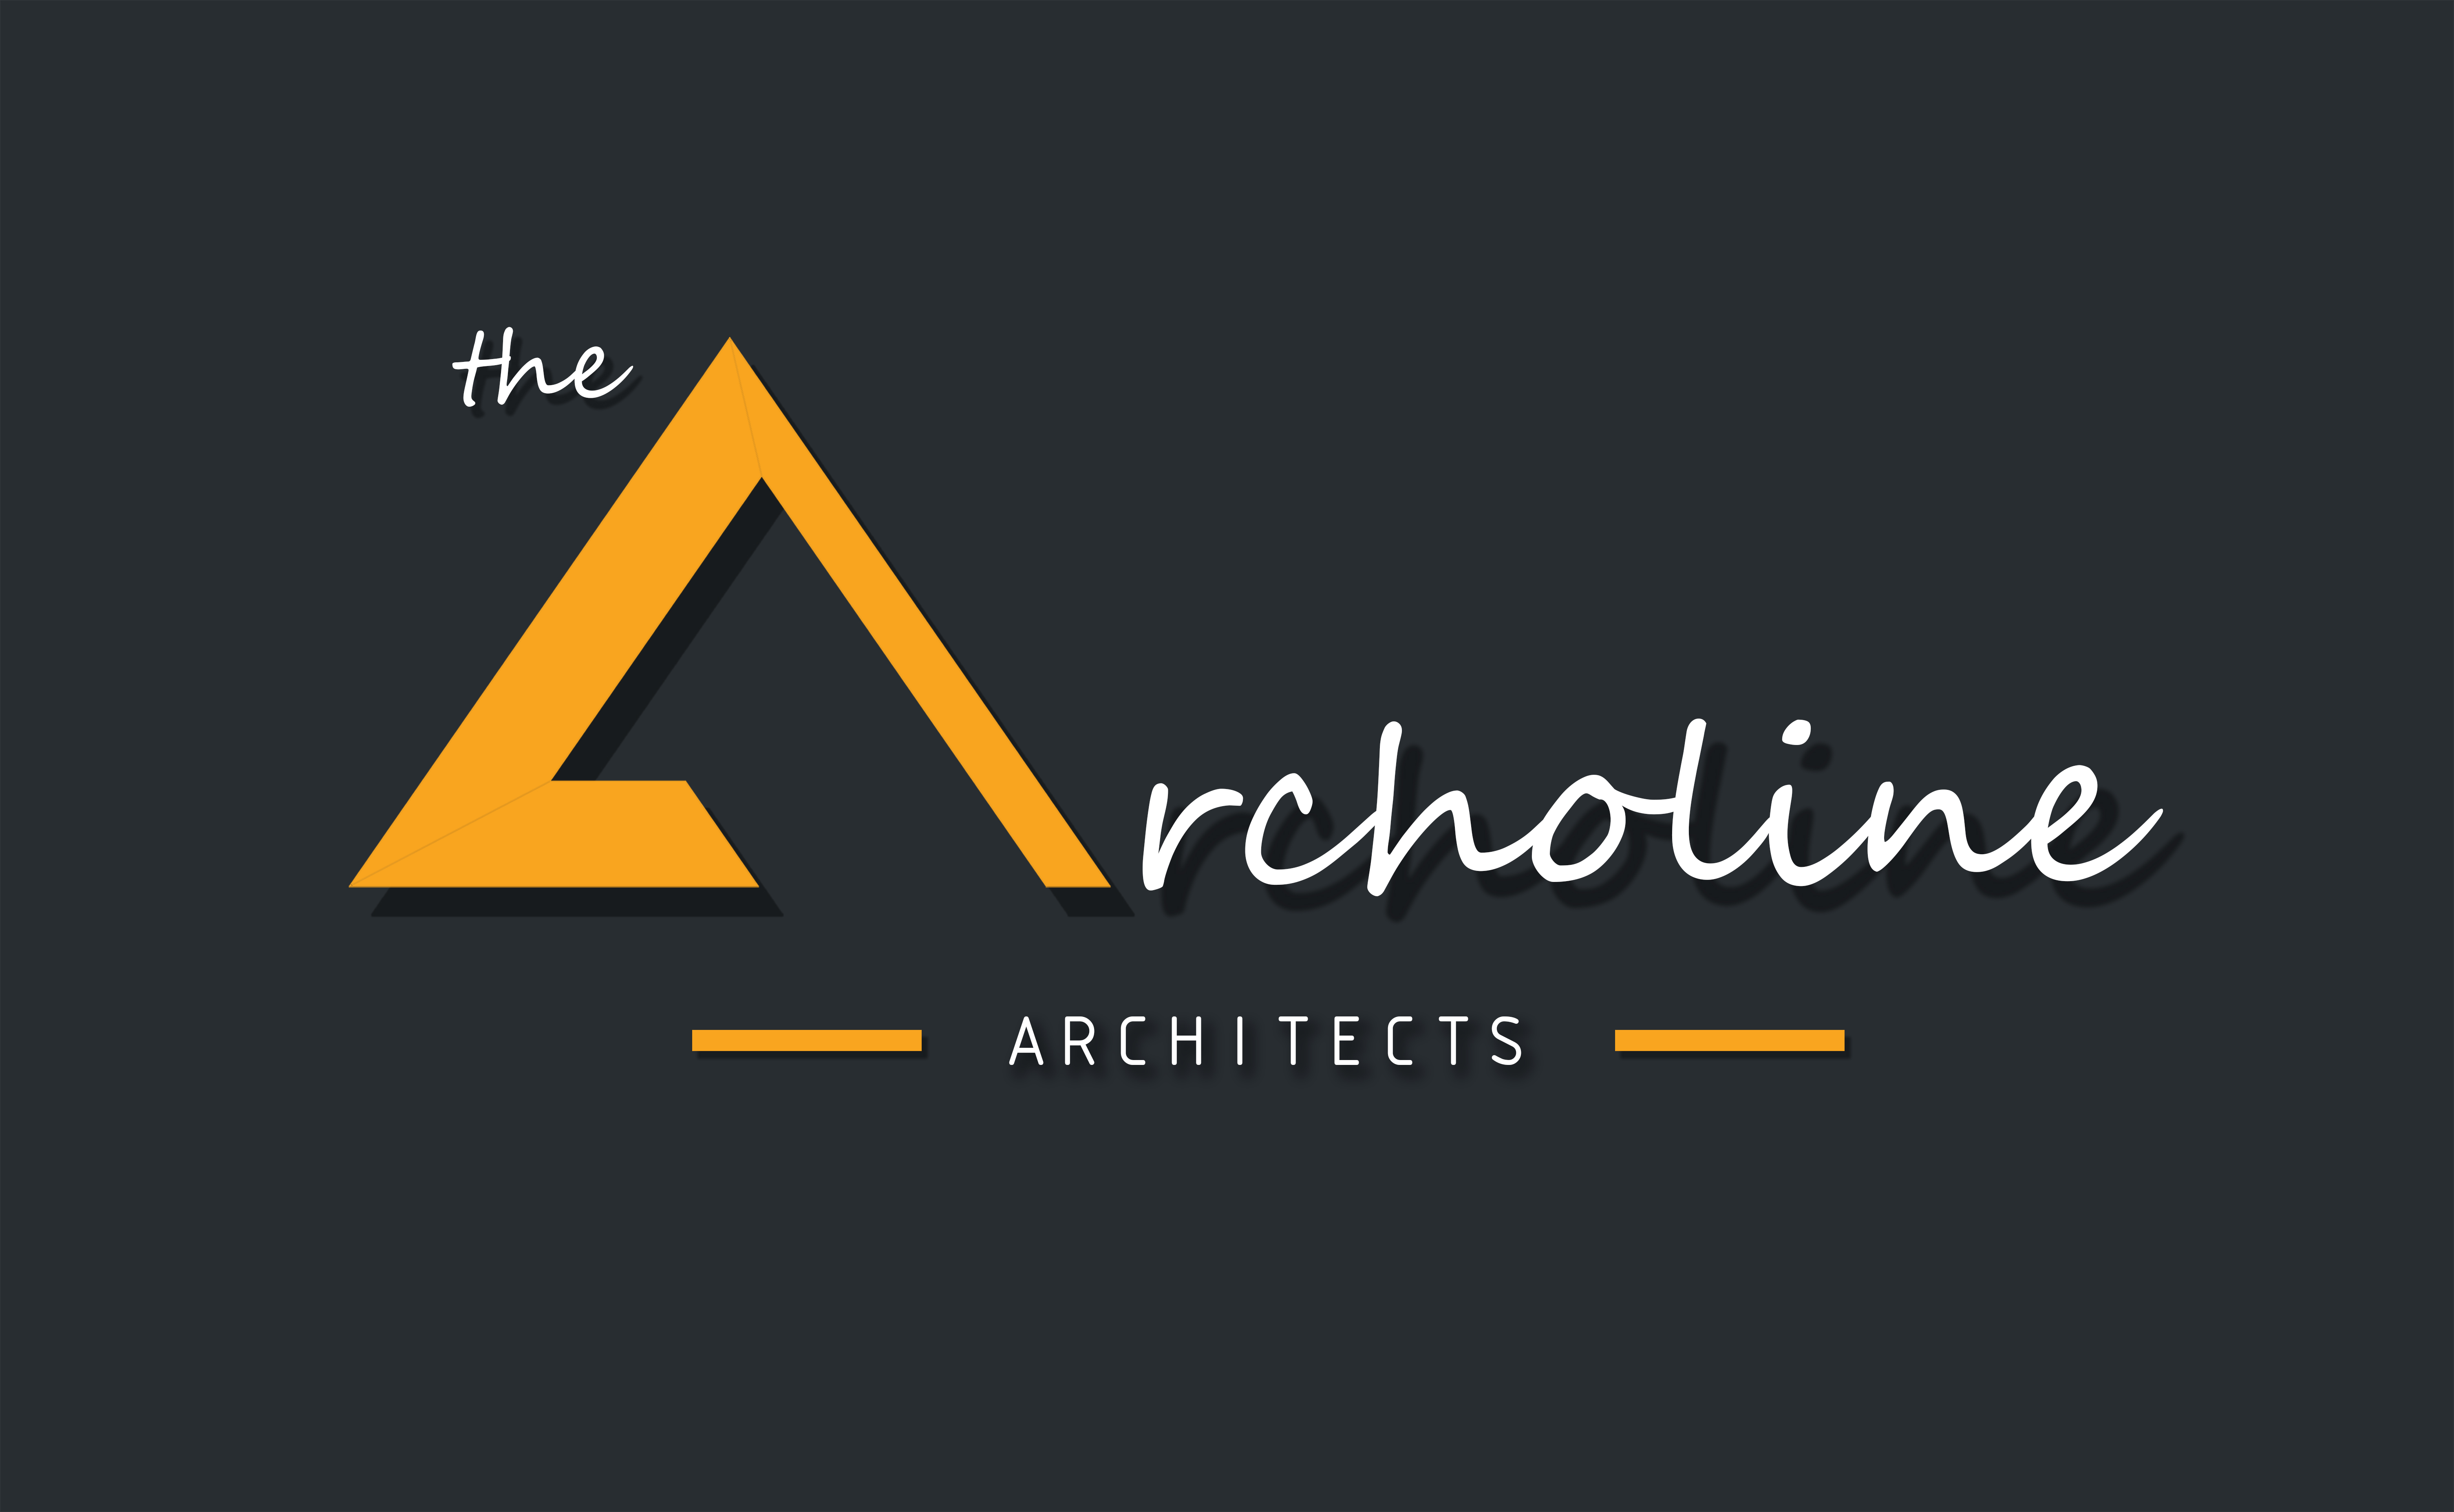 The Archoline Architects|Accounting Services|Professional Services